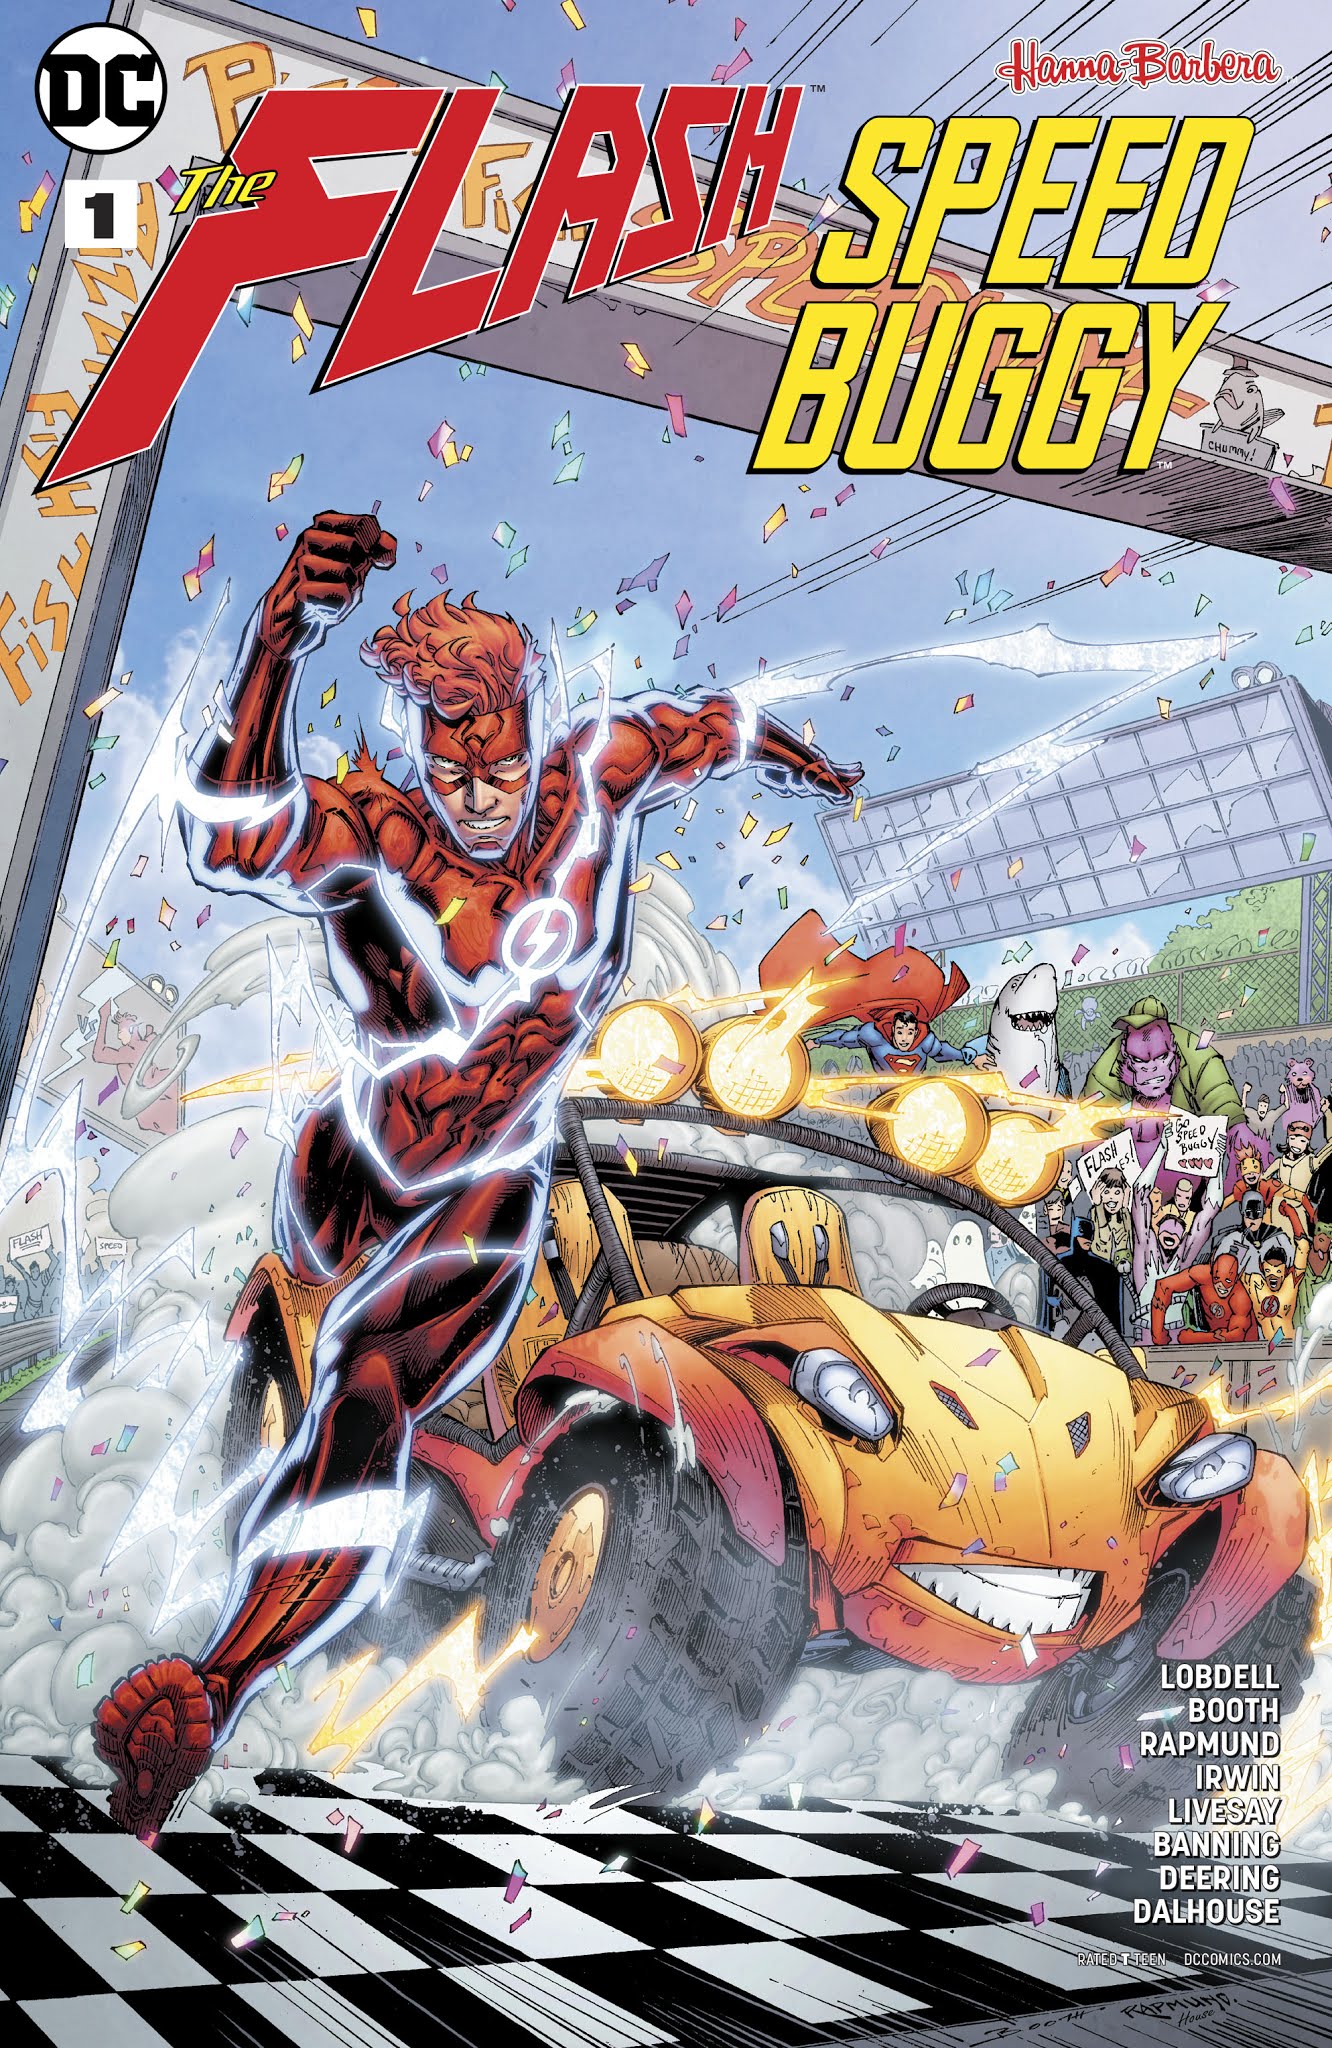 Read online DC Meets Hanna-Barbera comic -  Issue # Issue Flash - Speed Buggy - 1